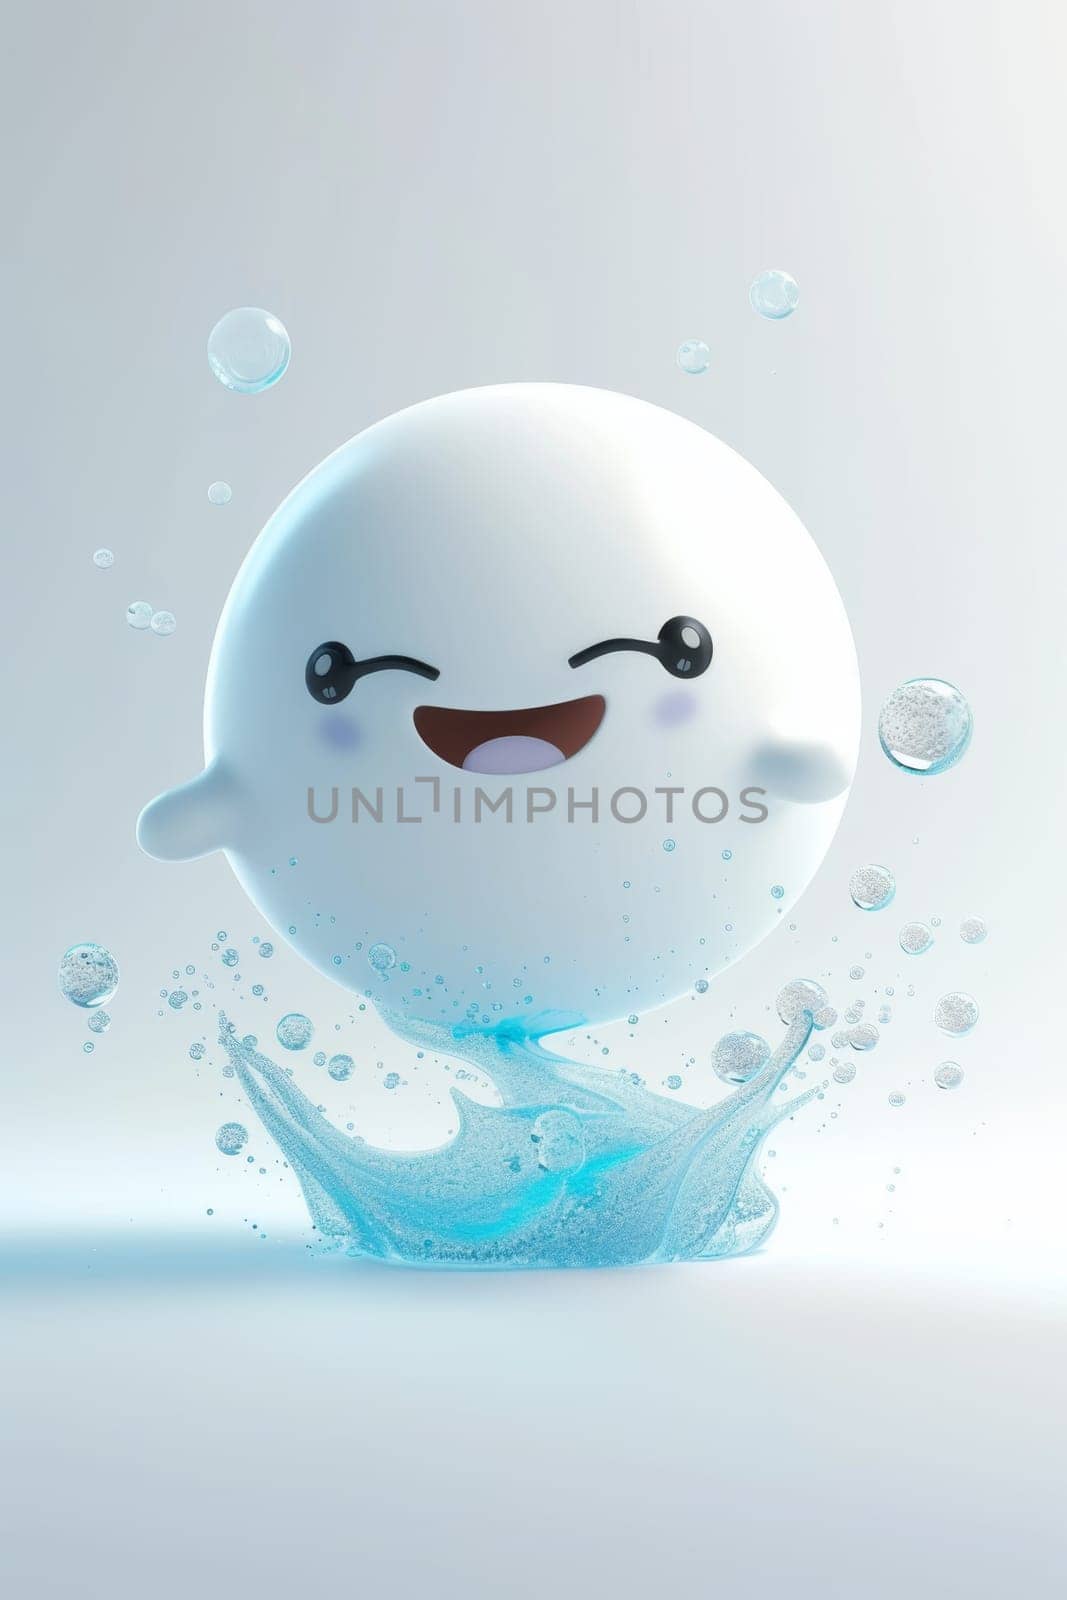 a lucky charm in the form of a soap bubble on a white background. 3d illustration by Lobachad